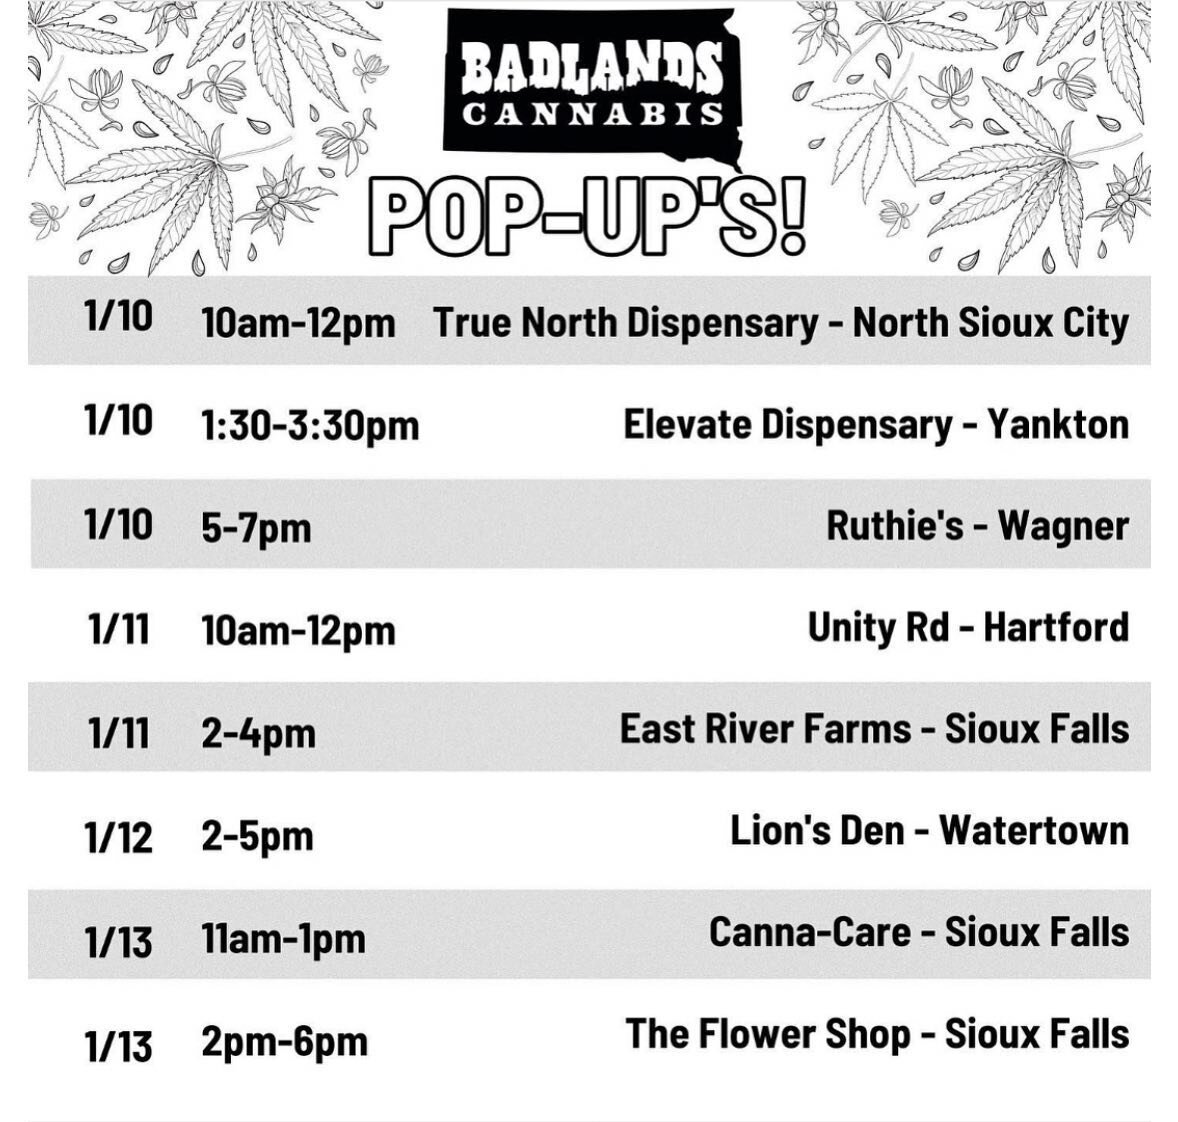 Patient Education Pop Up Schedule for this upcoming week! Come out and meet Jamie our amazing sales rep for @badlands.cannabis &amp; @605cannabis! She can teach you about our products and answer all of your questions. She also has some awesome swag t